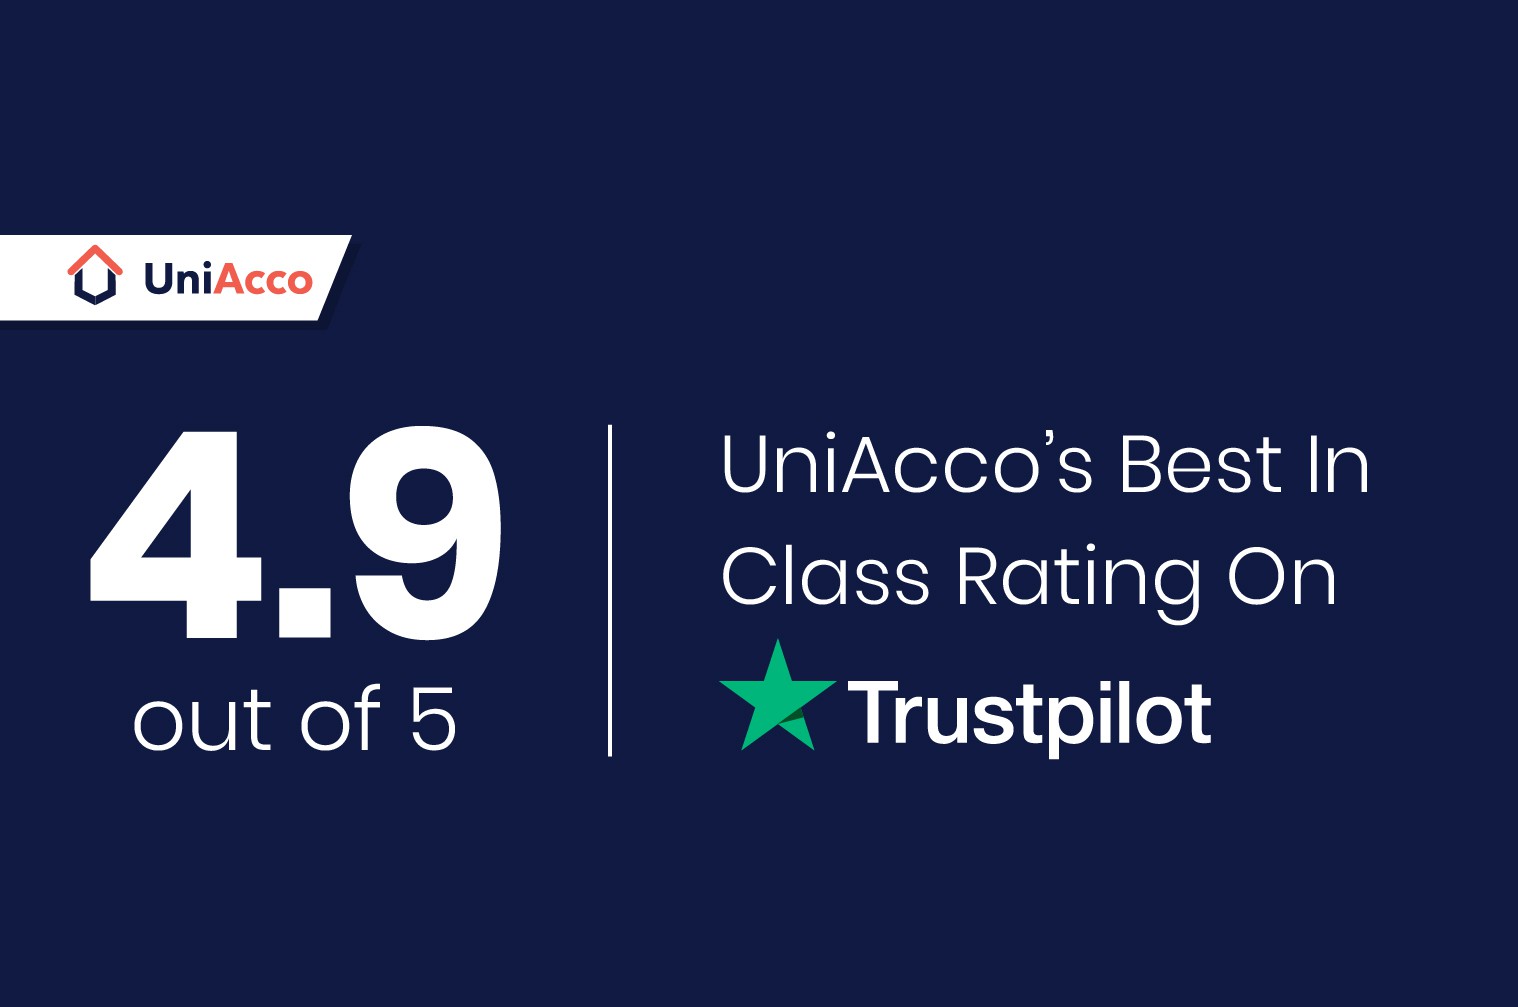 UniAcco’s Best In Class Rating On Trustpilot